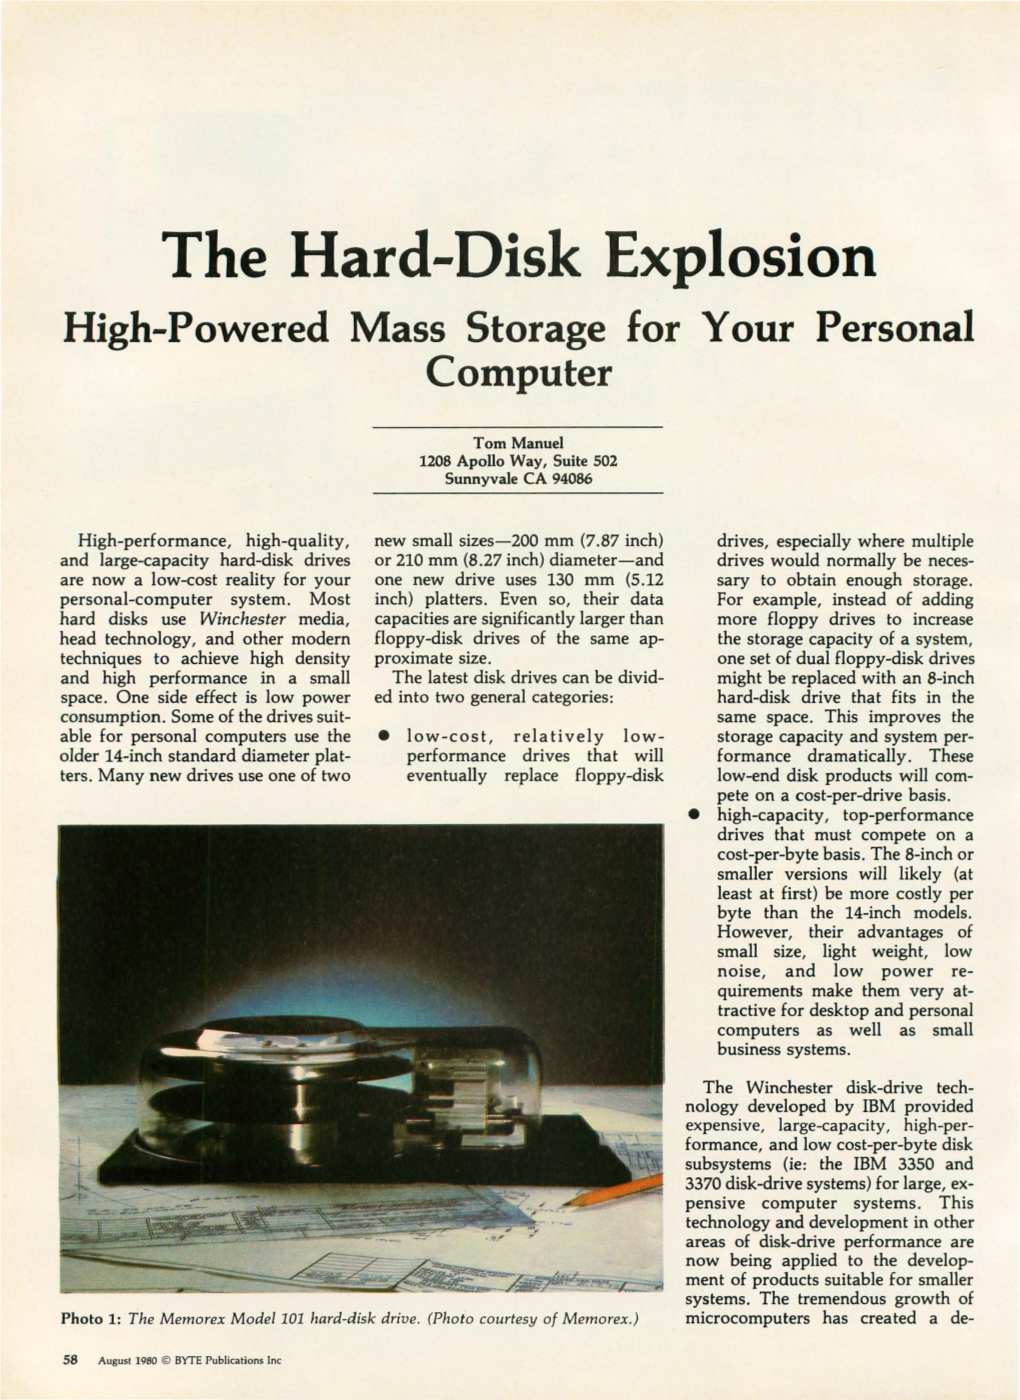 The Hard-Disk Explosion, August 1980, BYTE Magazine